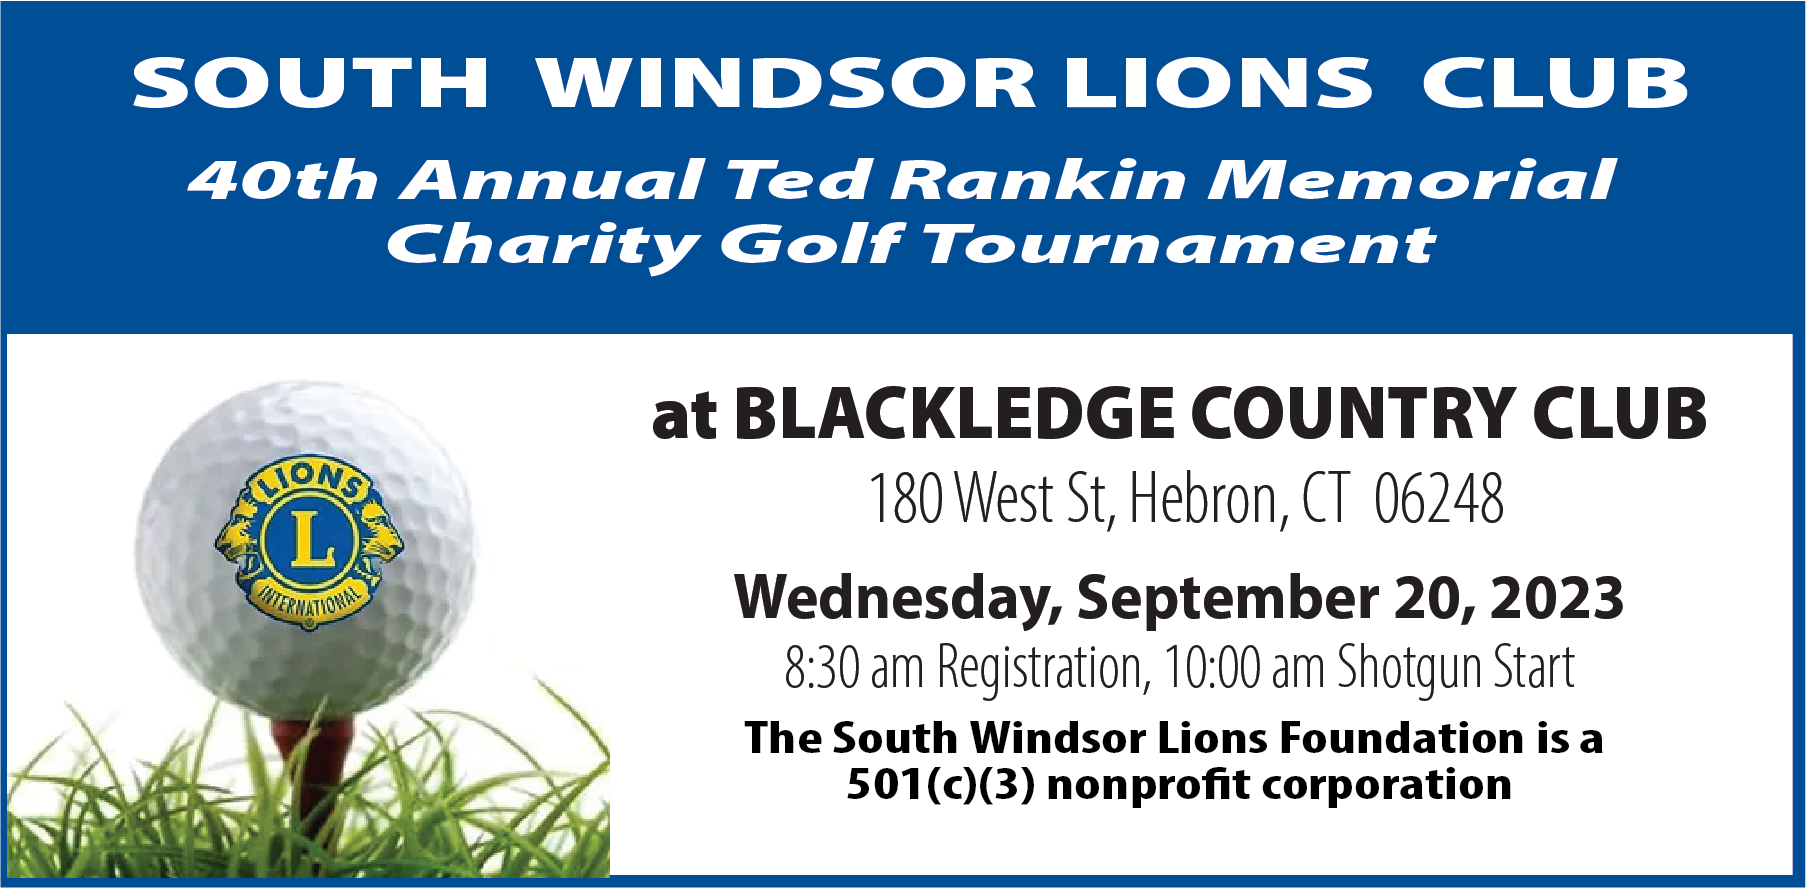 South Windsor Lions Club 40th Annual Charity Golf Tournament